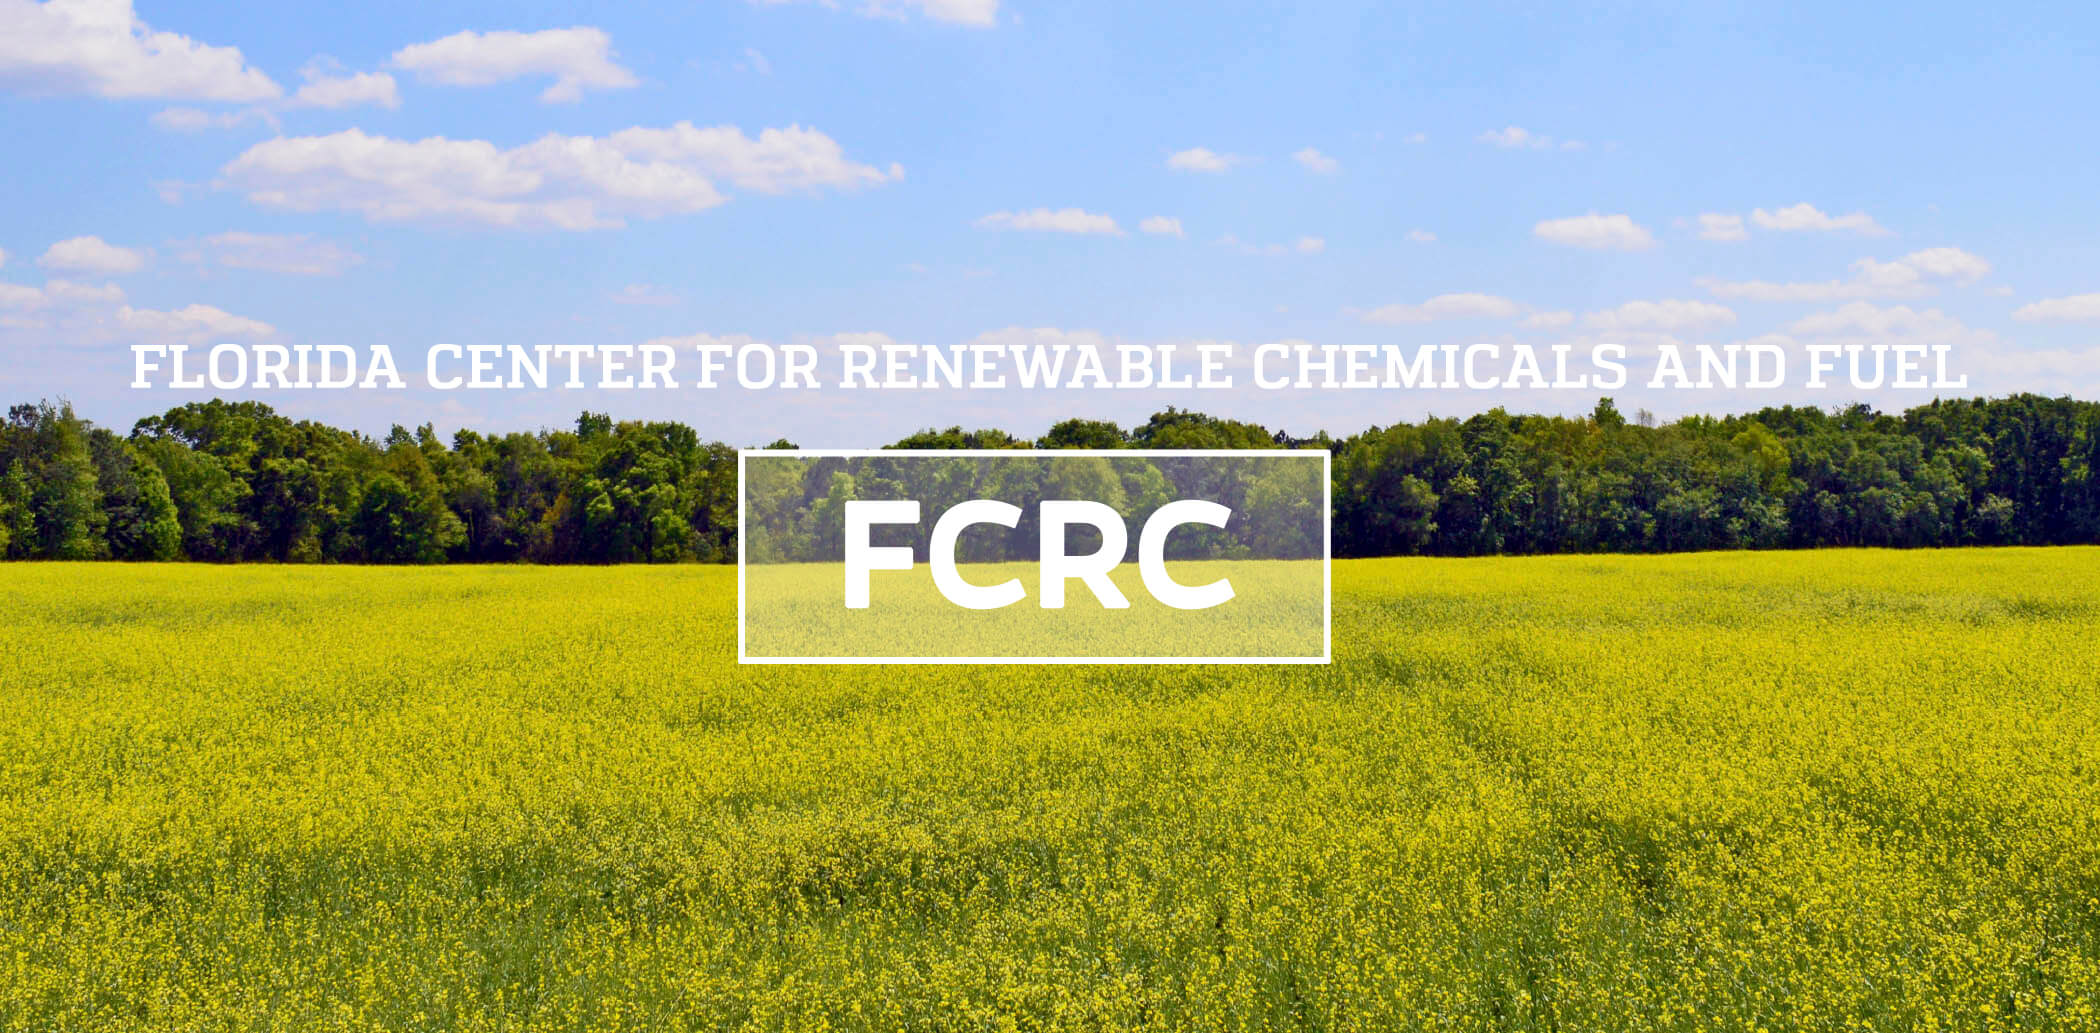 FCRC: Florida Center For Renewable Chemicals and Fuels